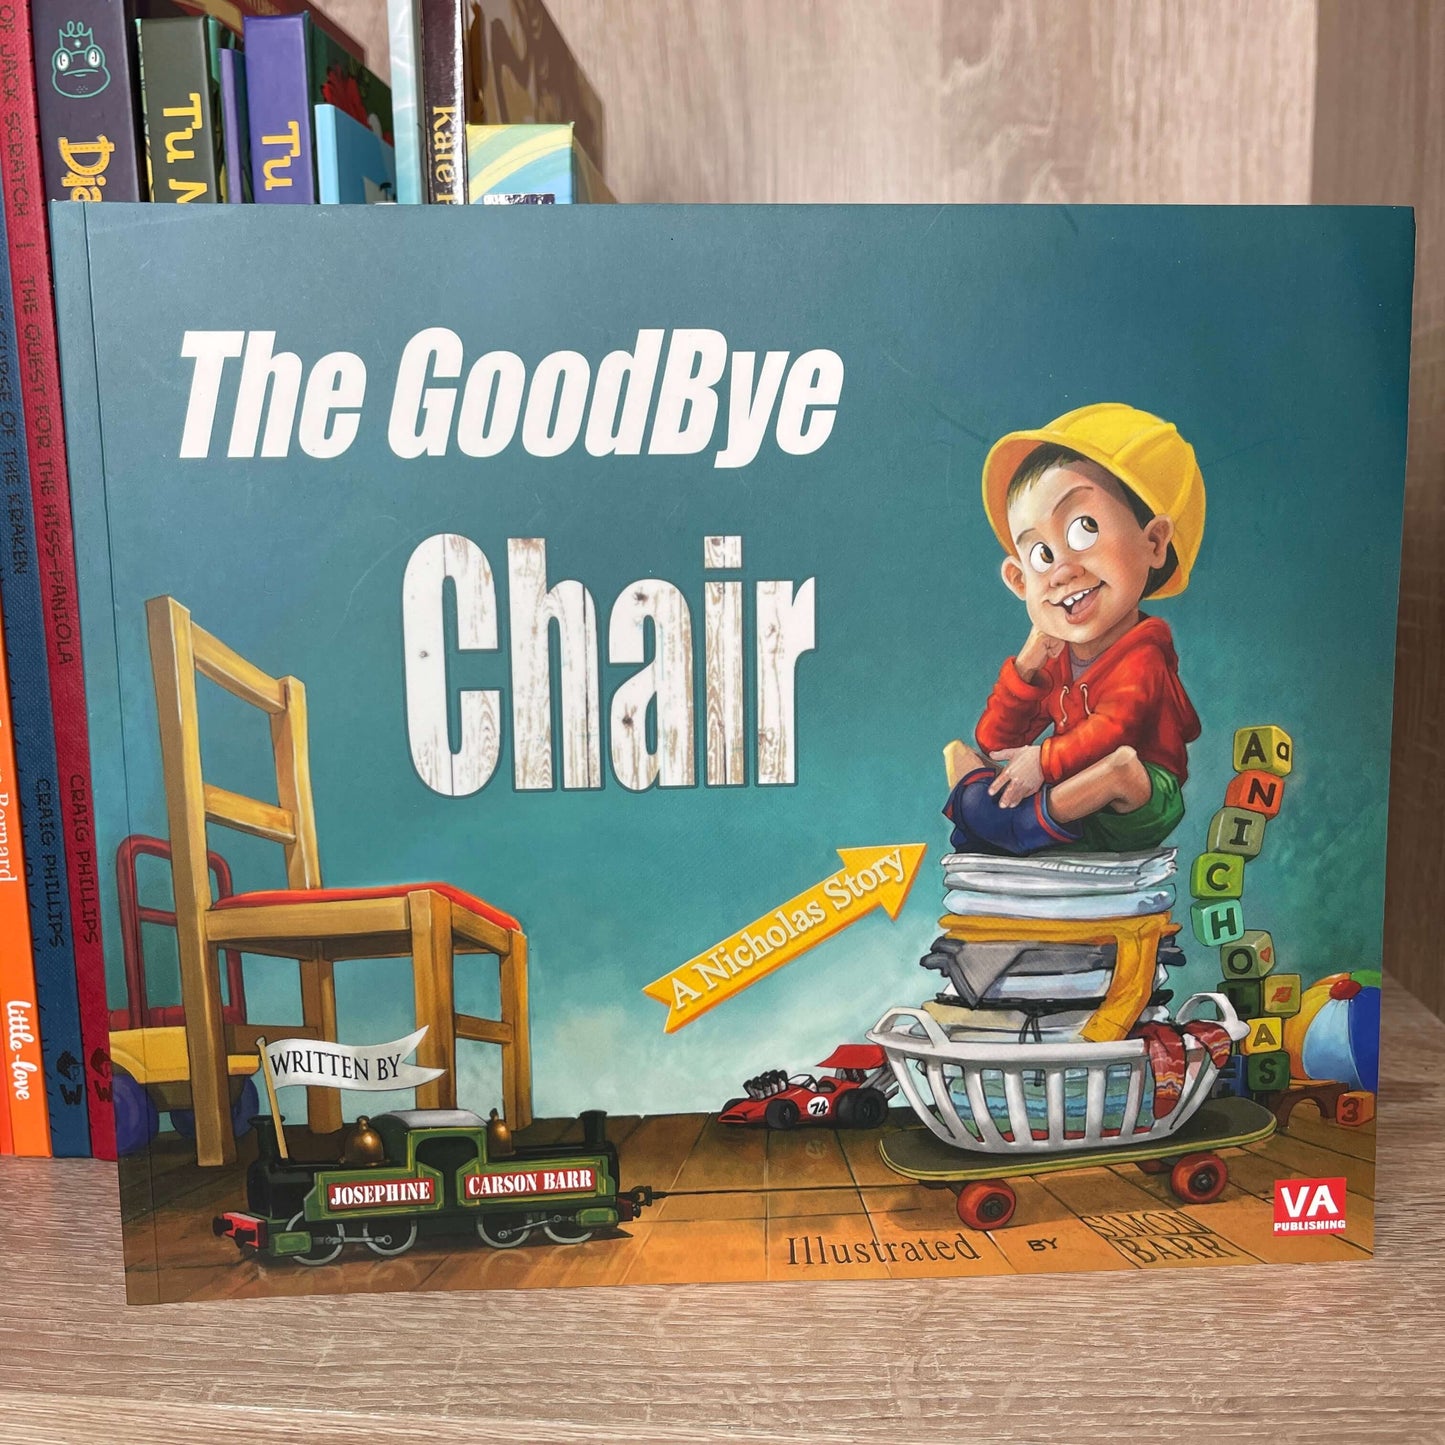 Childrens book The Goodbye Chair by Josephine Carson Barr.